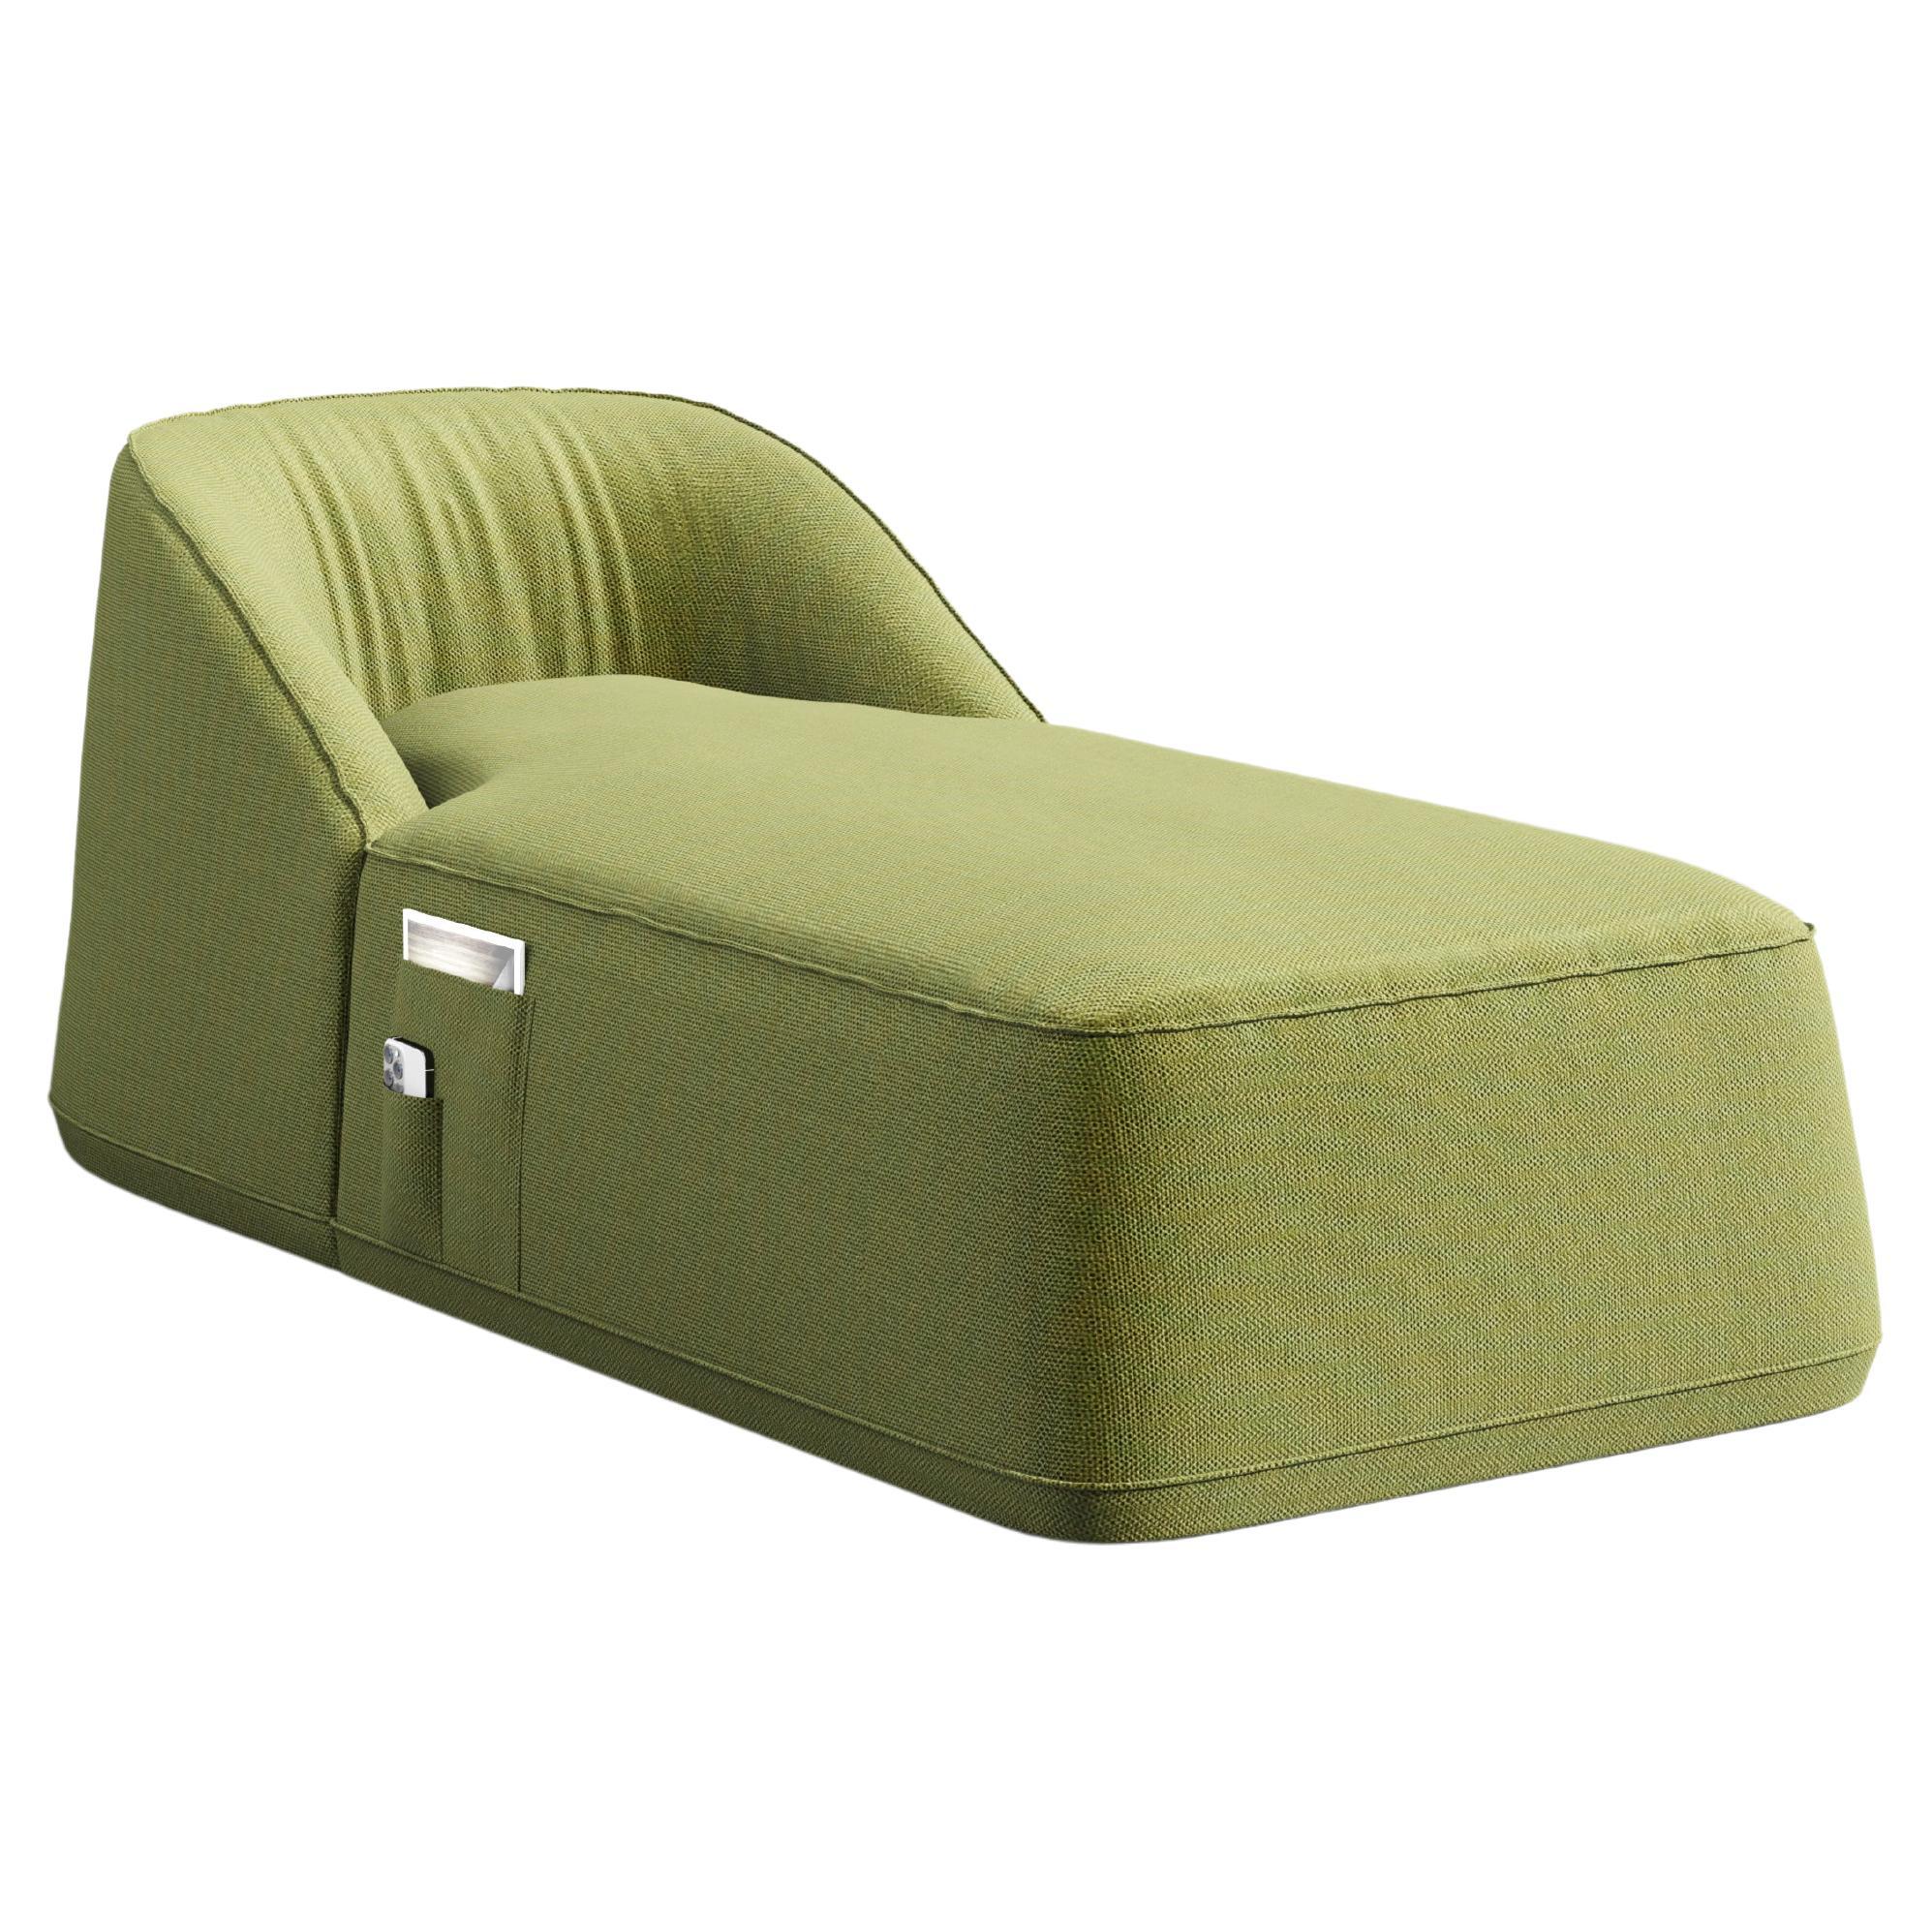 Modern Outdoor Sunbed Weather-Resistant Sunbrella Fabric Upholstery in Green